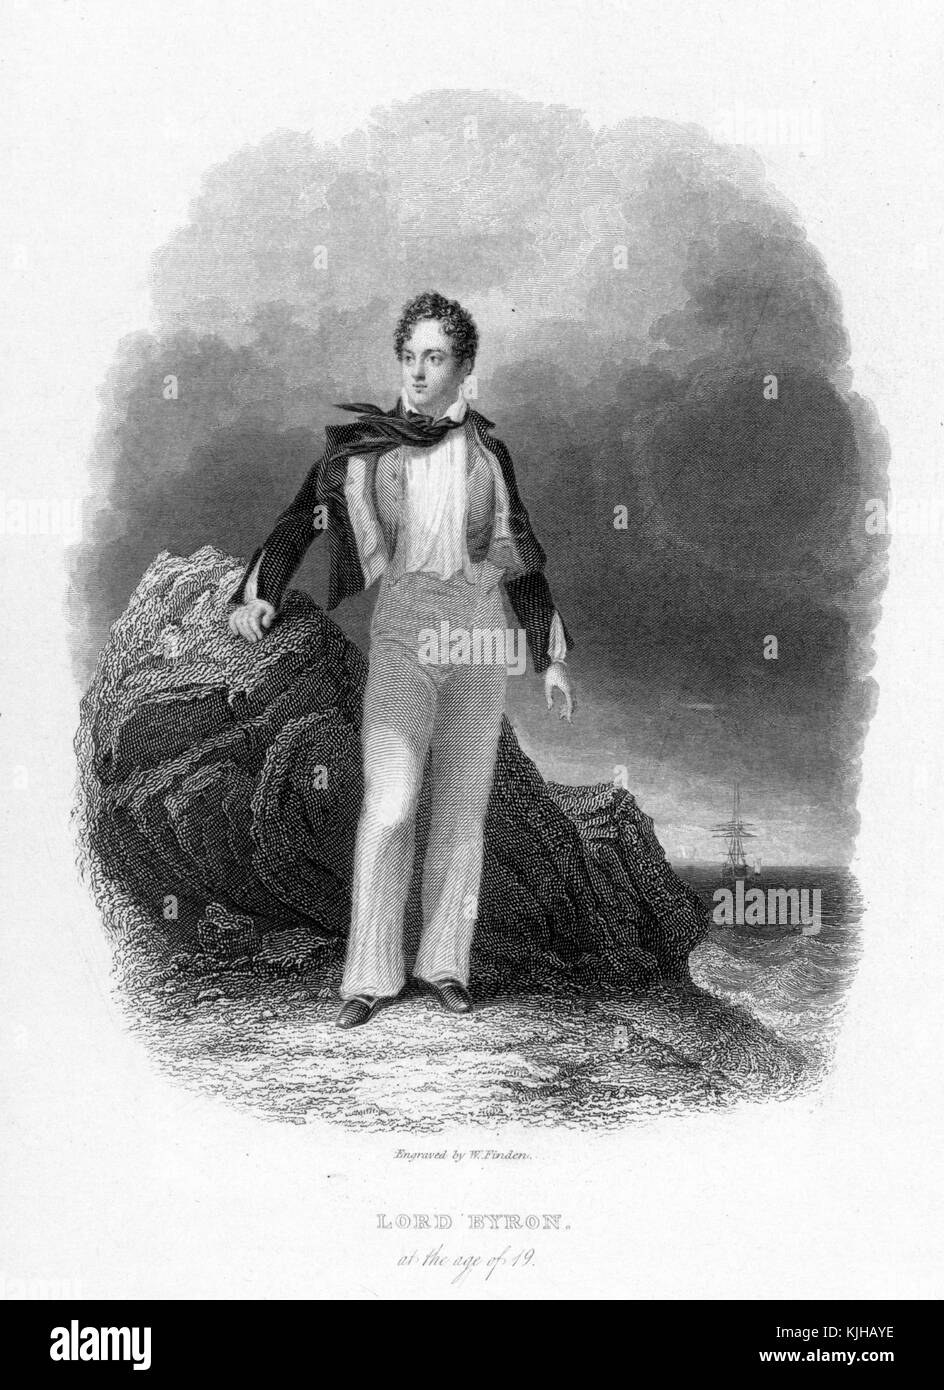 An engraving from a full length portrait of Lord Byron, he is shown at age 19 and posed leaning on a rock at the edge of turbulent seas, he was an English poet whose works remain popular throughout the world, he was a prominent figure in the Romantic Movement, he was known for living in excess, stories about him surrounded his life filled with love affairs with men and women along with huge debts, he is considered a hero in Greece for fighting alongside them against the Ottoman Empire, he died at age 36, 1900. From the New York Public Library. Stock Photo